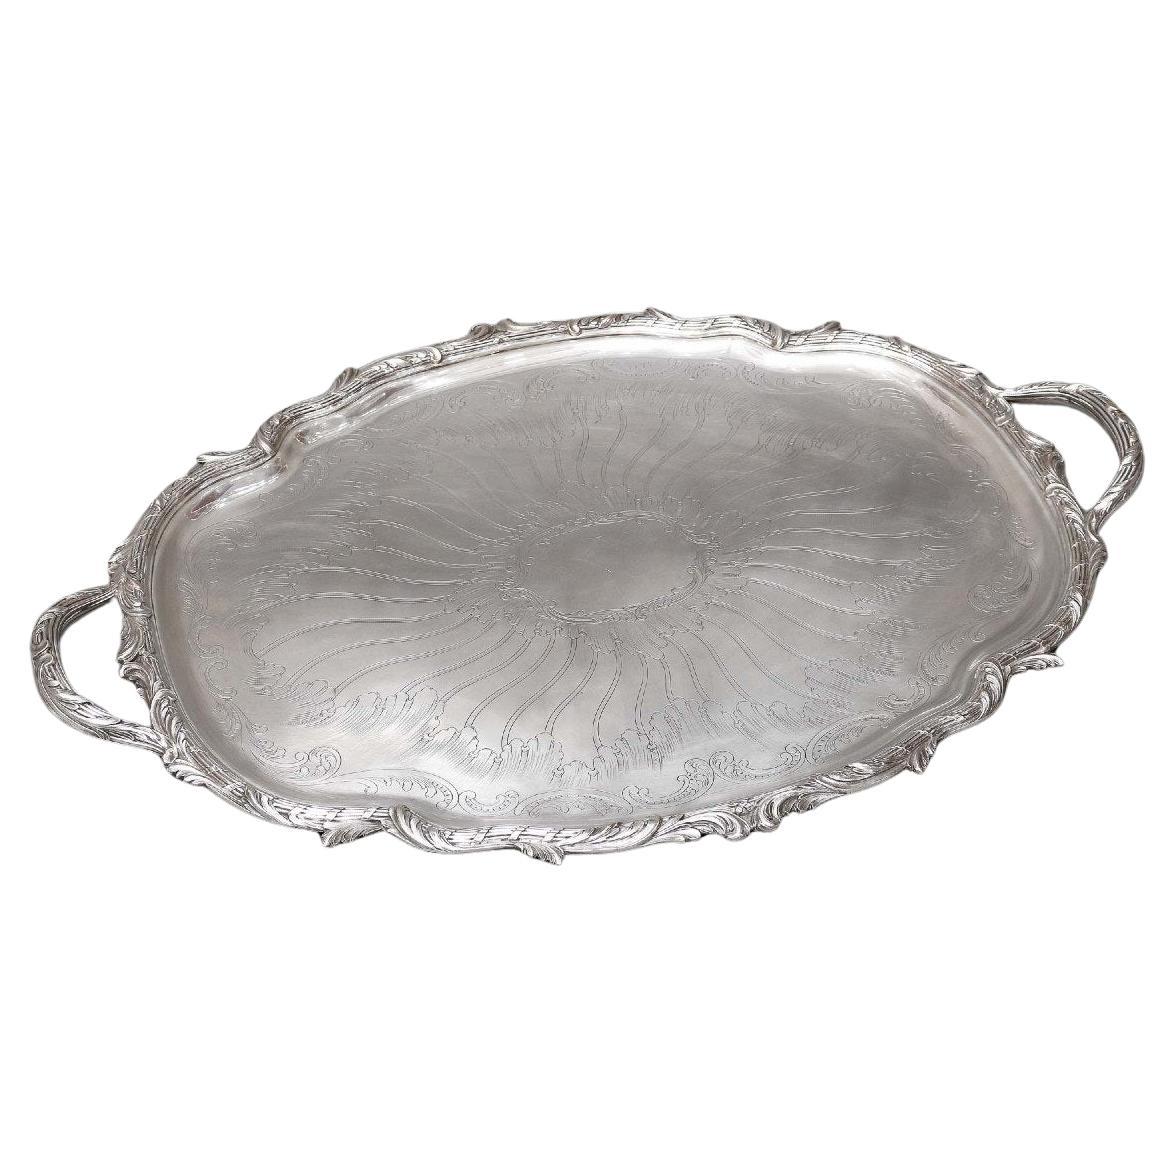 Goldsmith Odiot - Oval Tray Xix Circa 1860/1880 For Sale